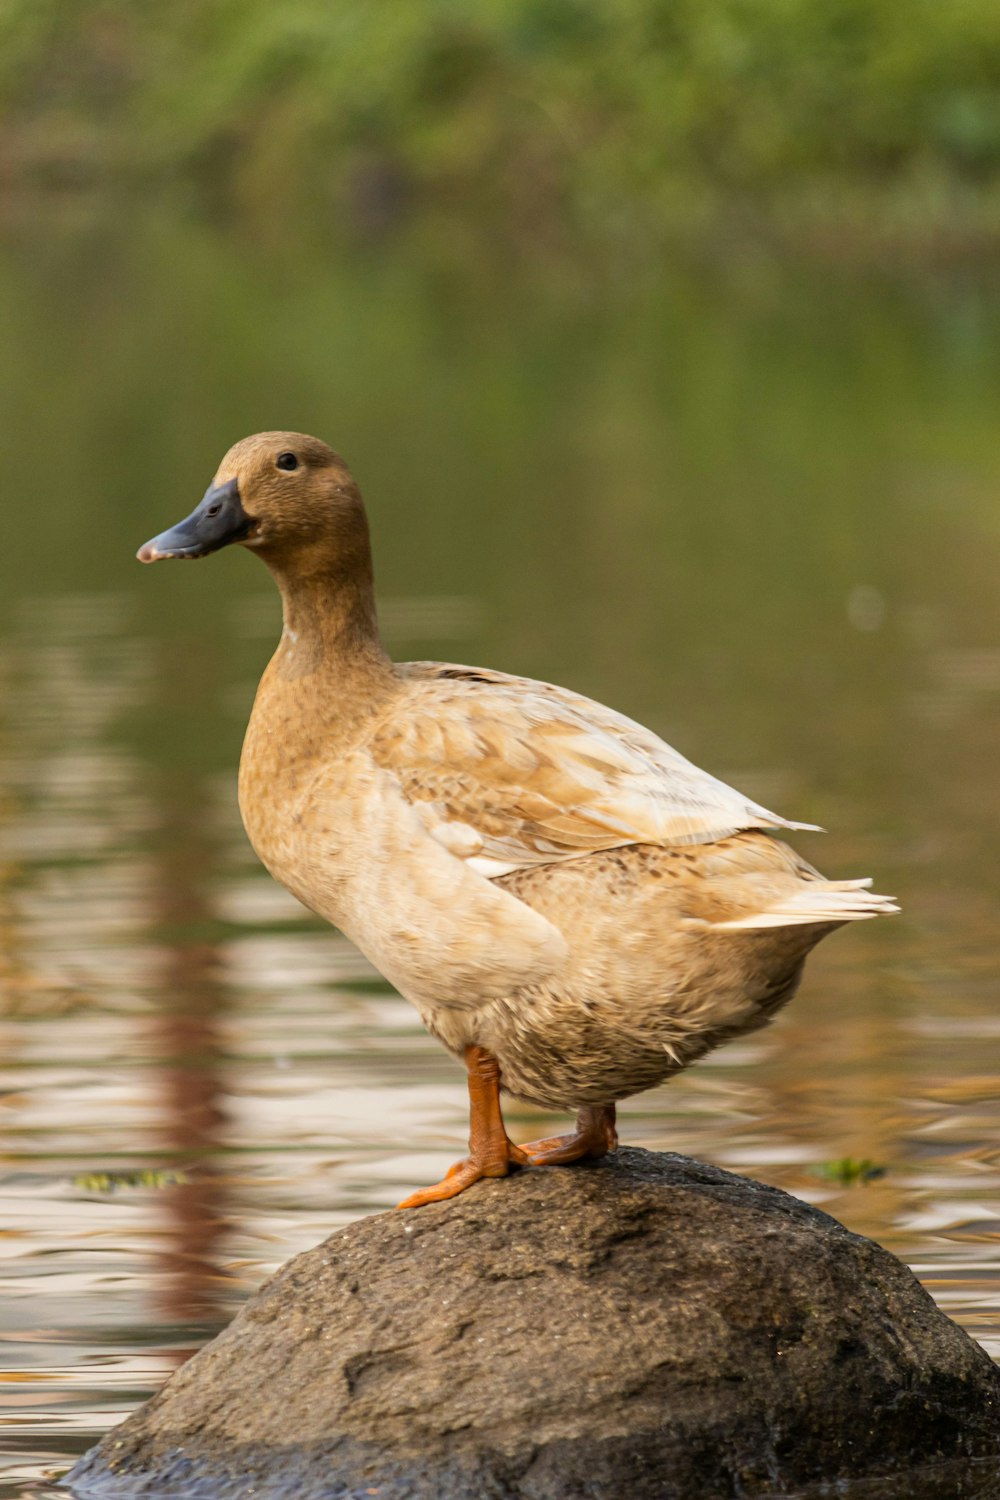 a duck is standing on a rock in the water